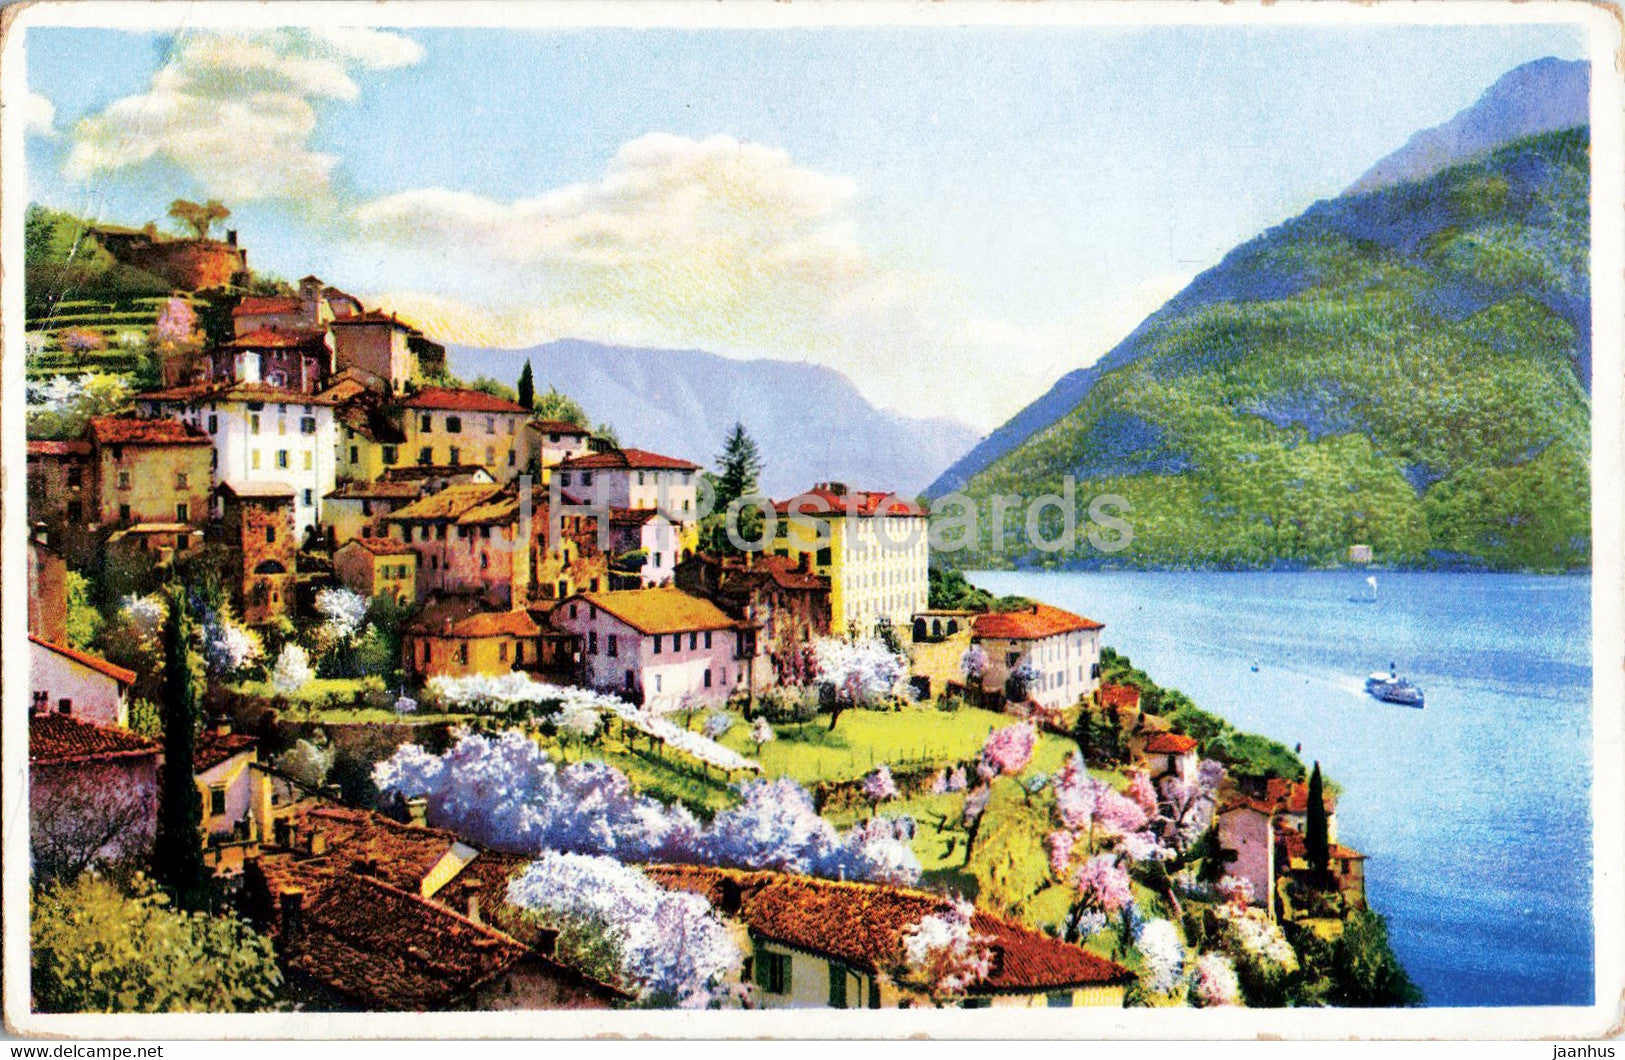 town view - Photochromie - Serie 367 - 5134 - old postcard - unused - JH Postcards